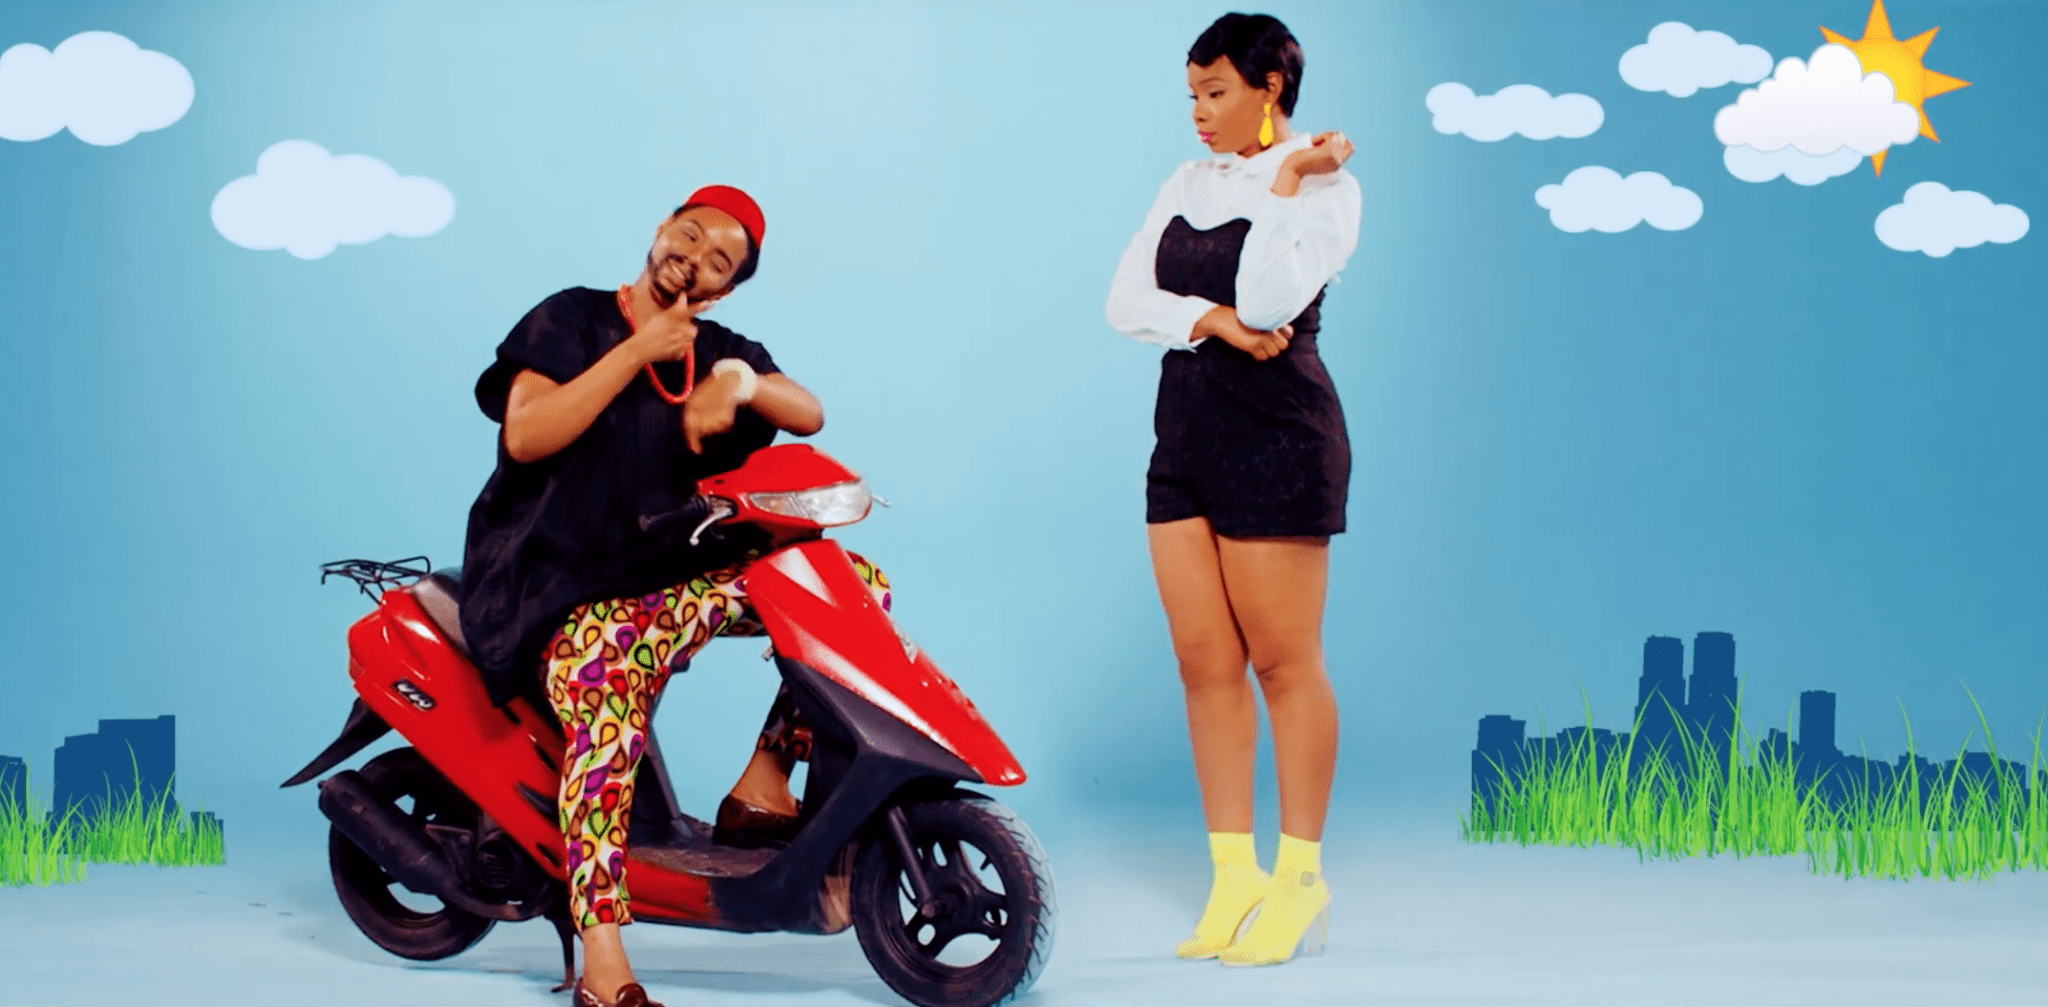 Yemi Alade is super queer on “Charliee”